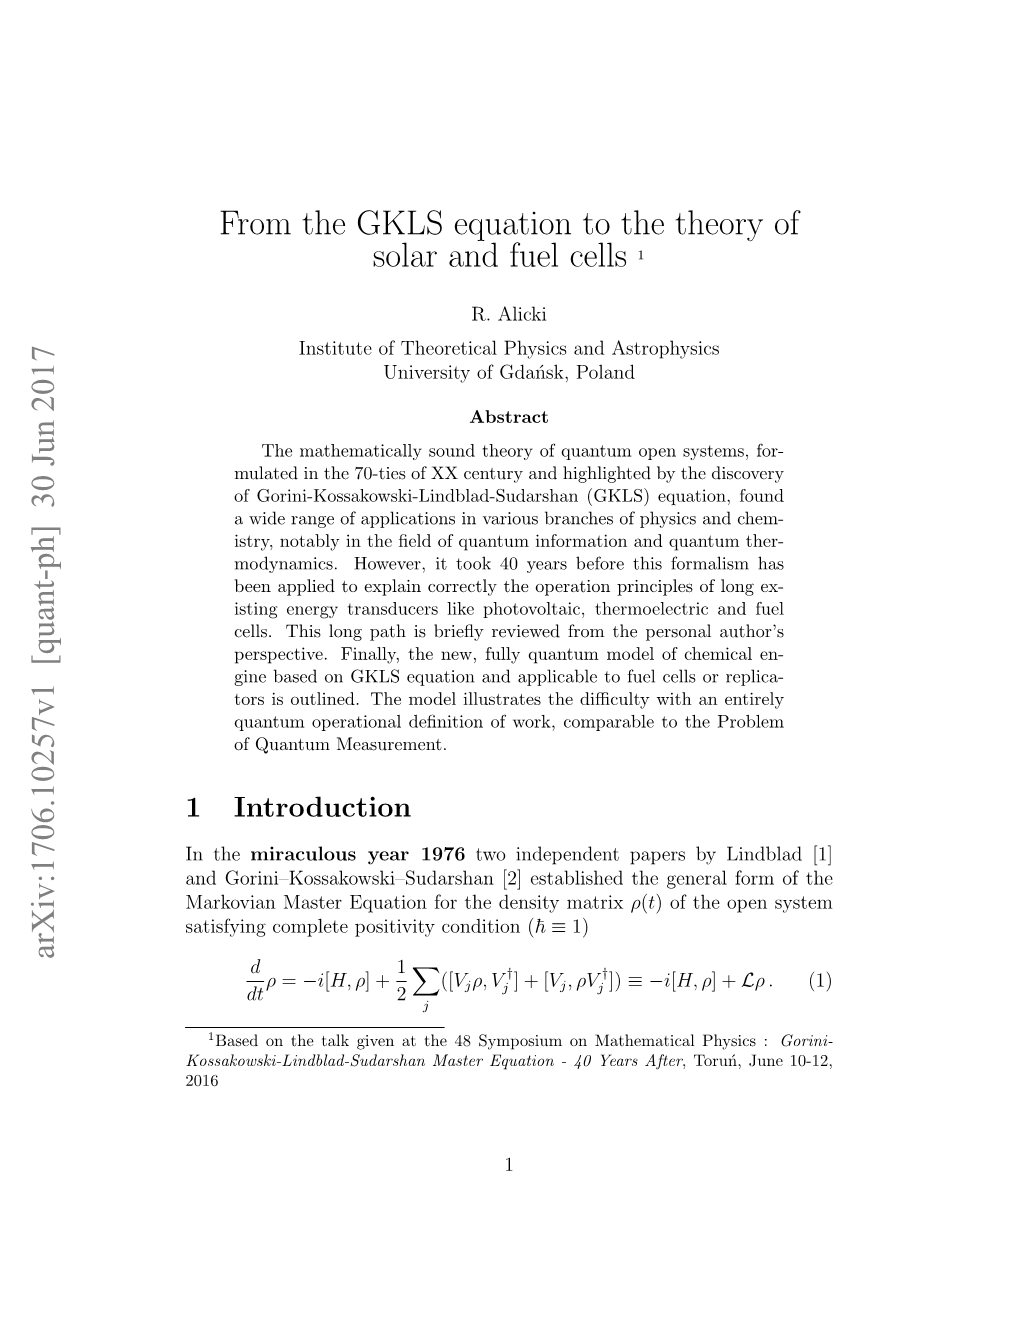 From the GKLS Equation to the Theory of Solar and Fuel Cells 1 Arxiv